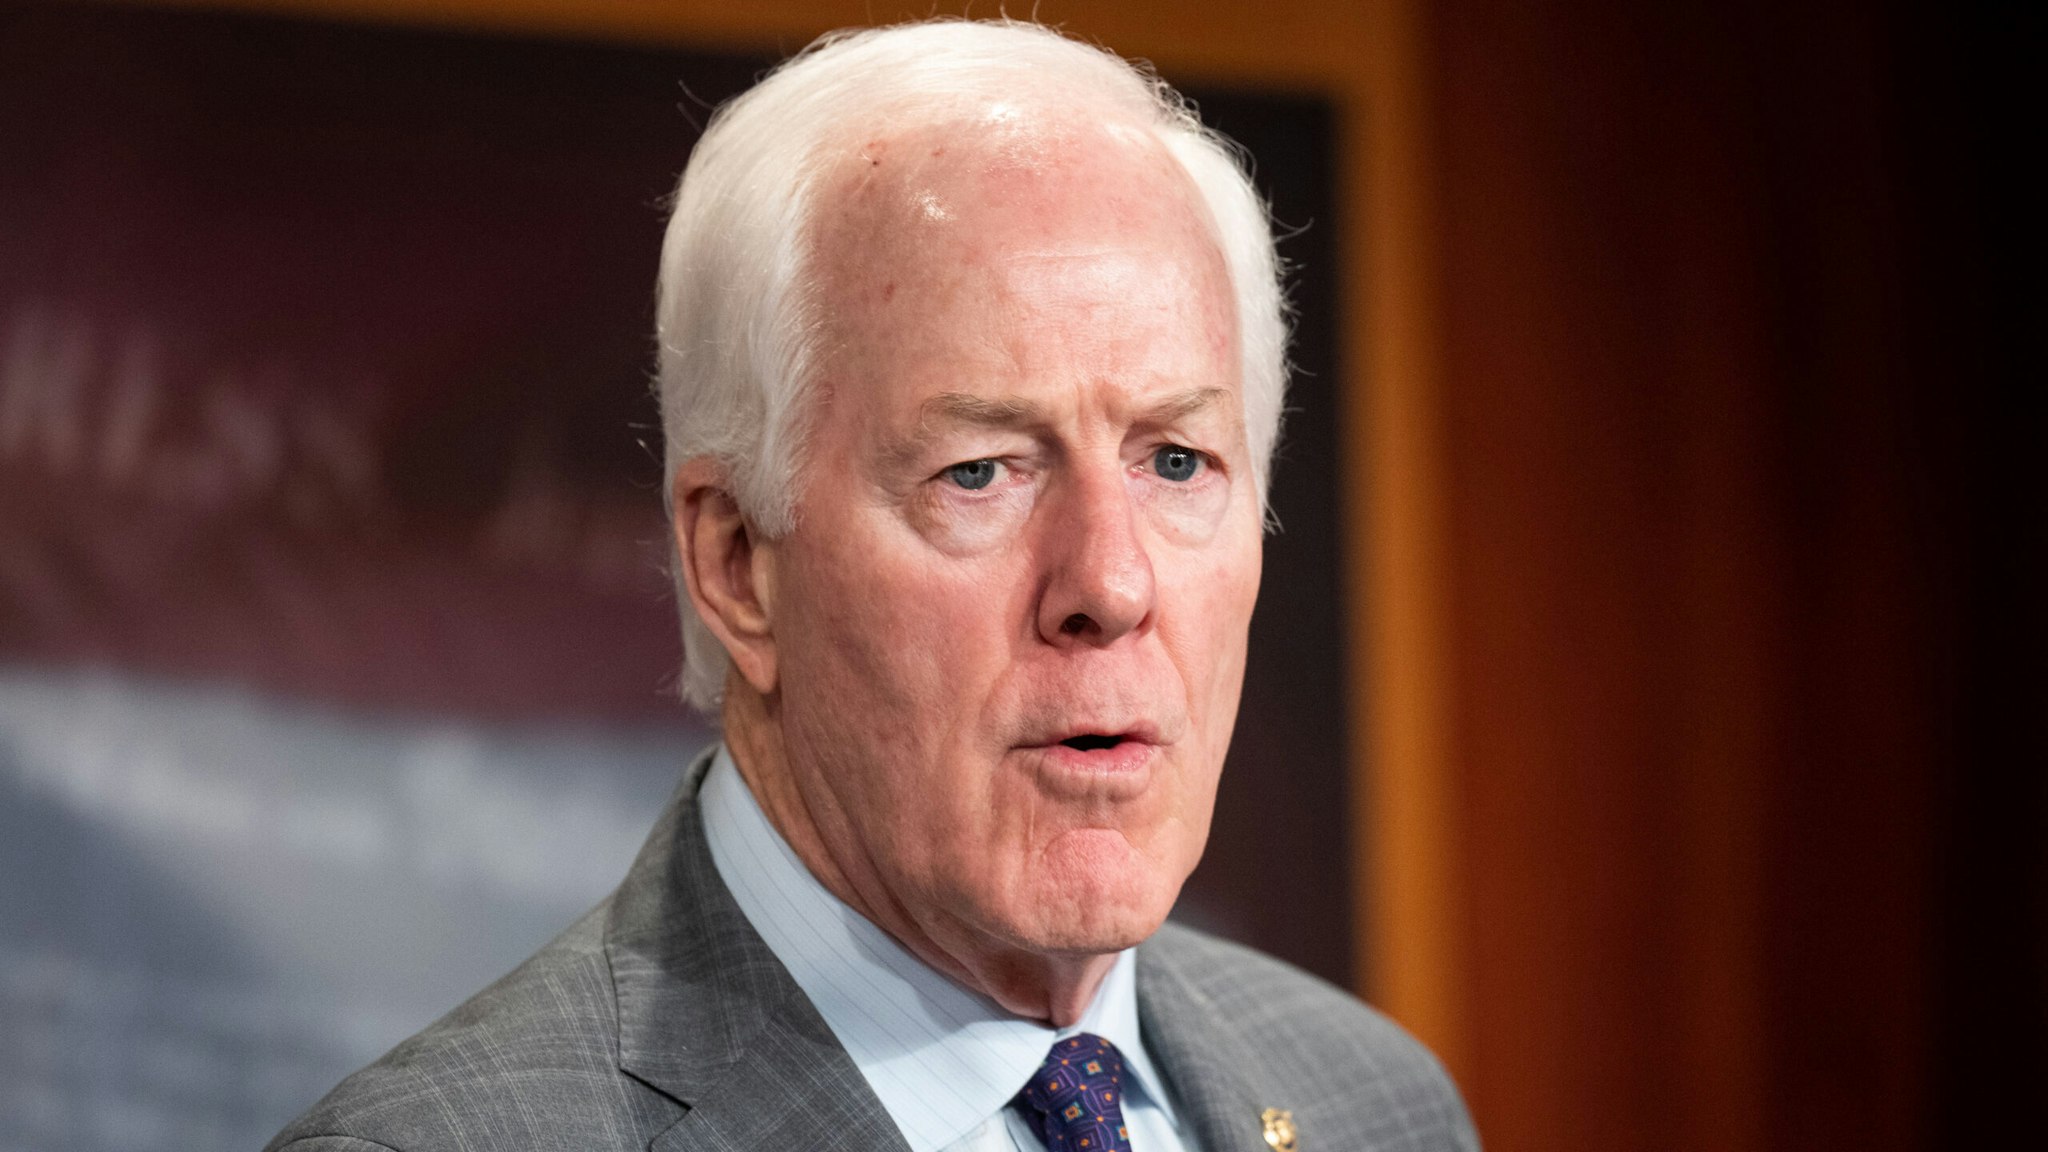 WASHINGTON - MAY 3: Sen. John Cornyn, R-Texas, speaks during the news conference in the Capitol on ending Title 42 on Wednesday, May 3, 2023.